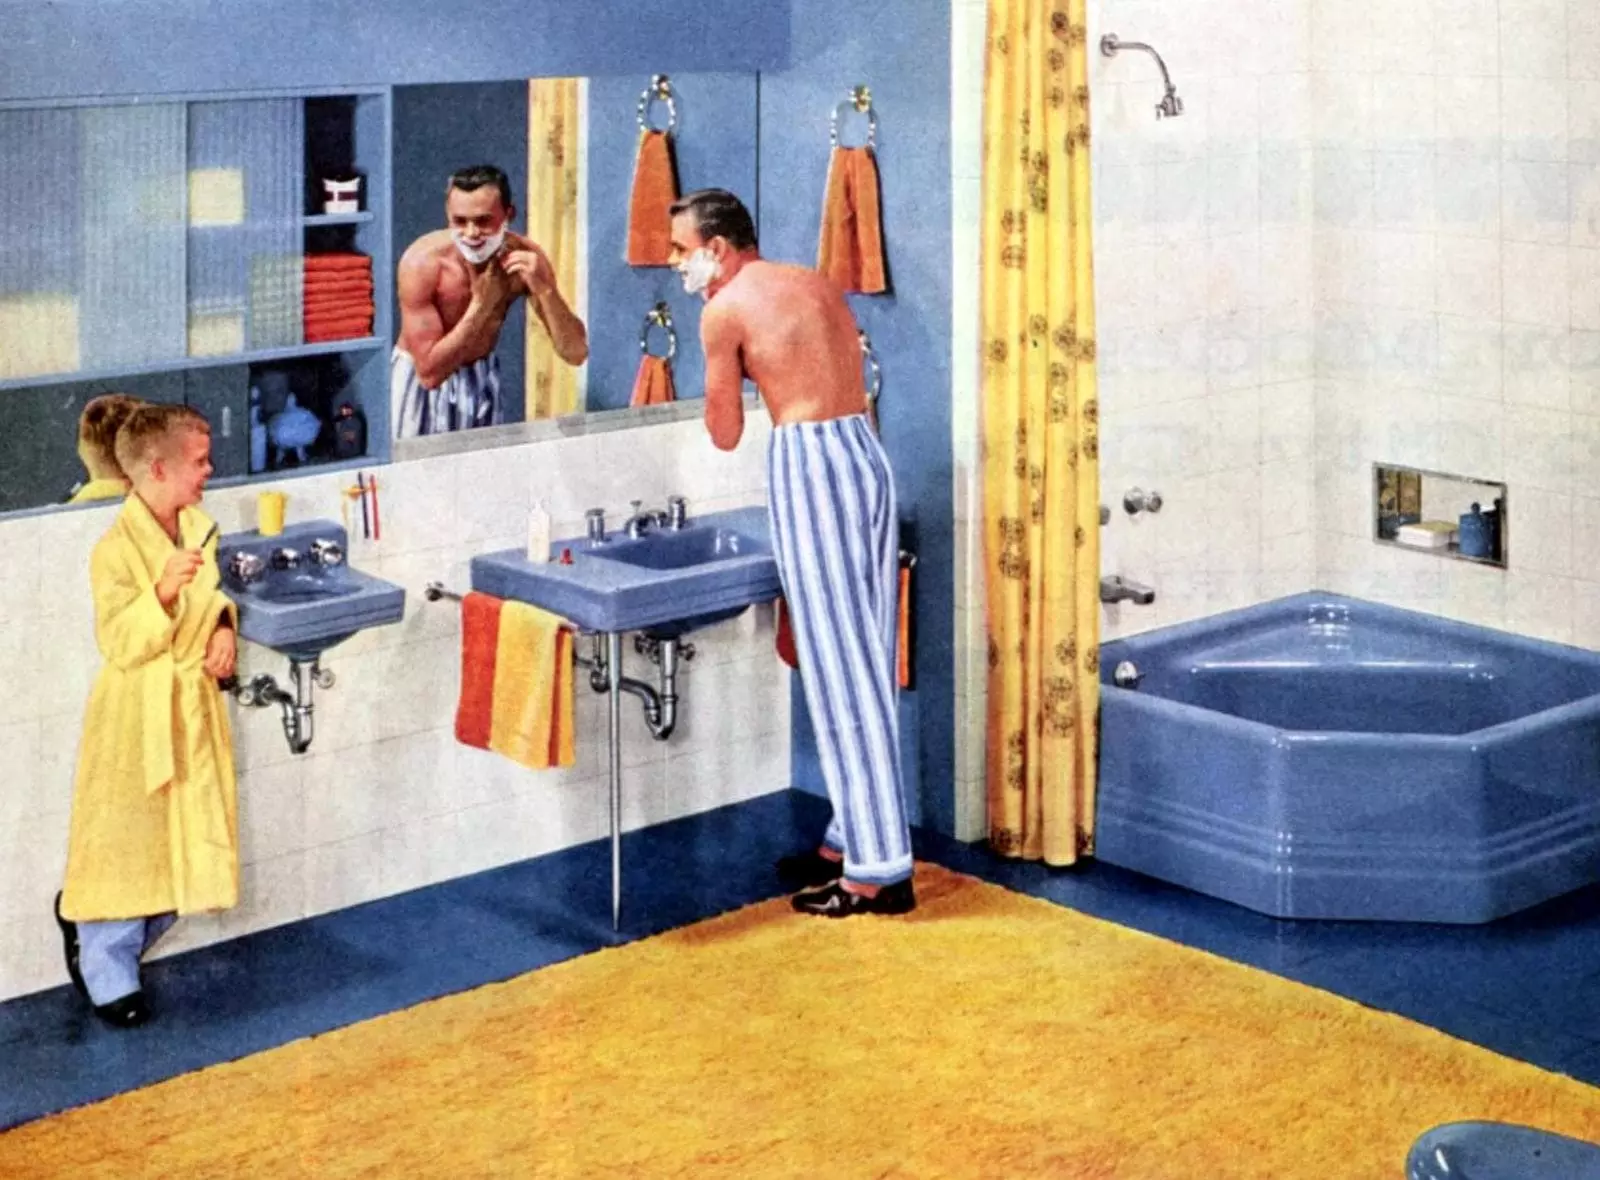 Bright yellow and blue bathroom decor from the 50s